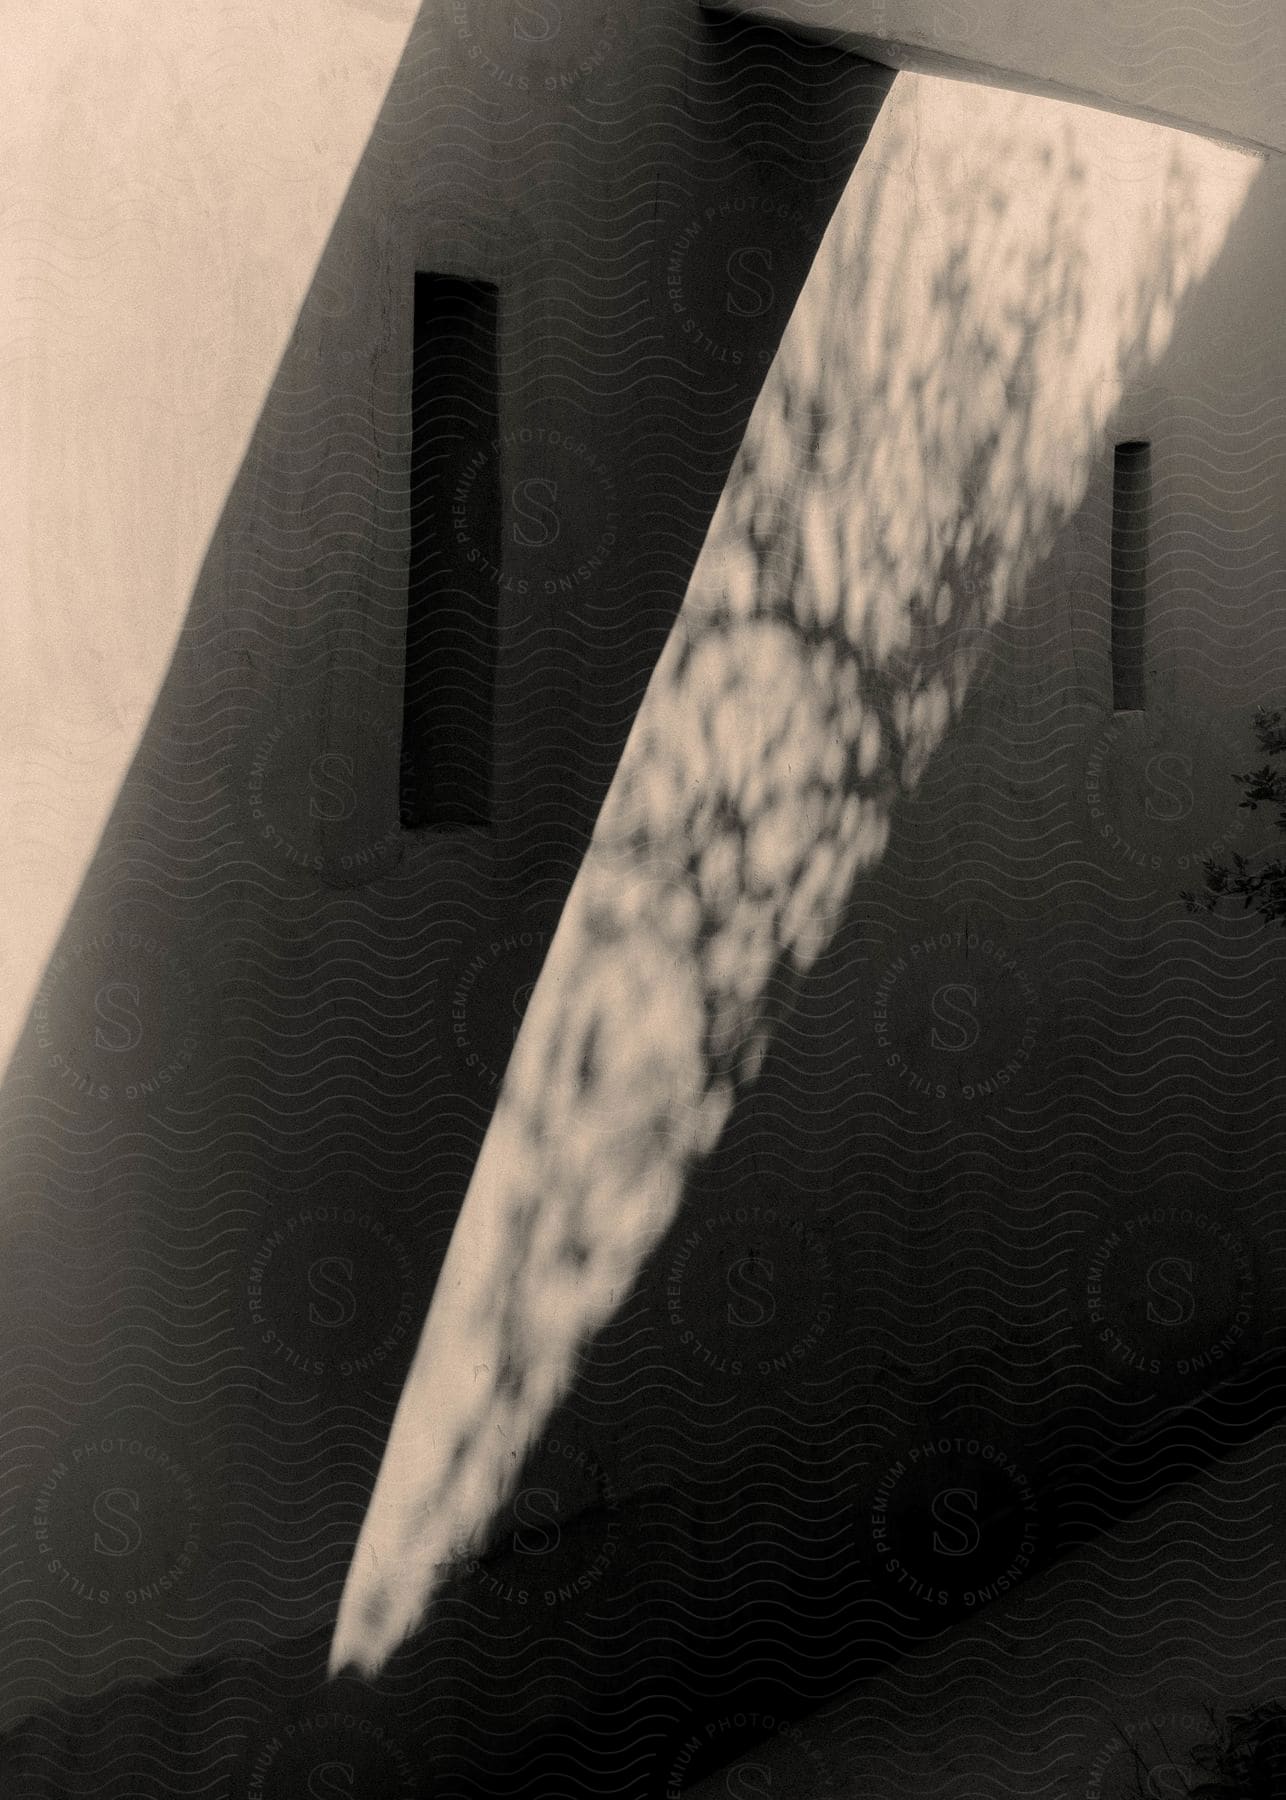 Shadows hitting the wall of a house.